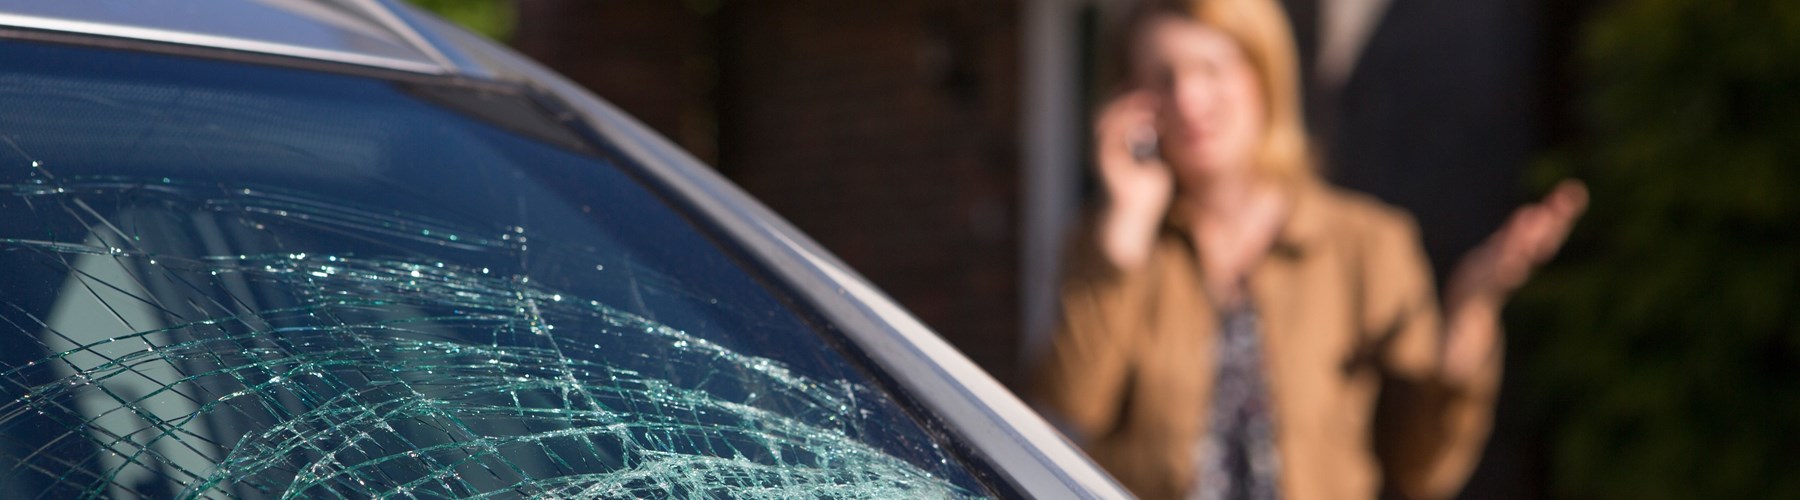 Broken car windscreen and woman on the phone 